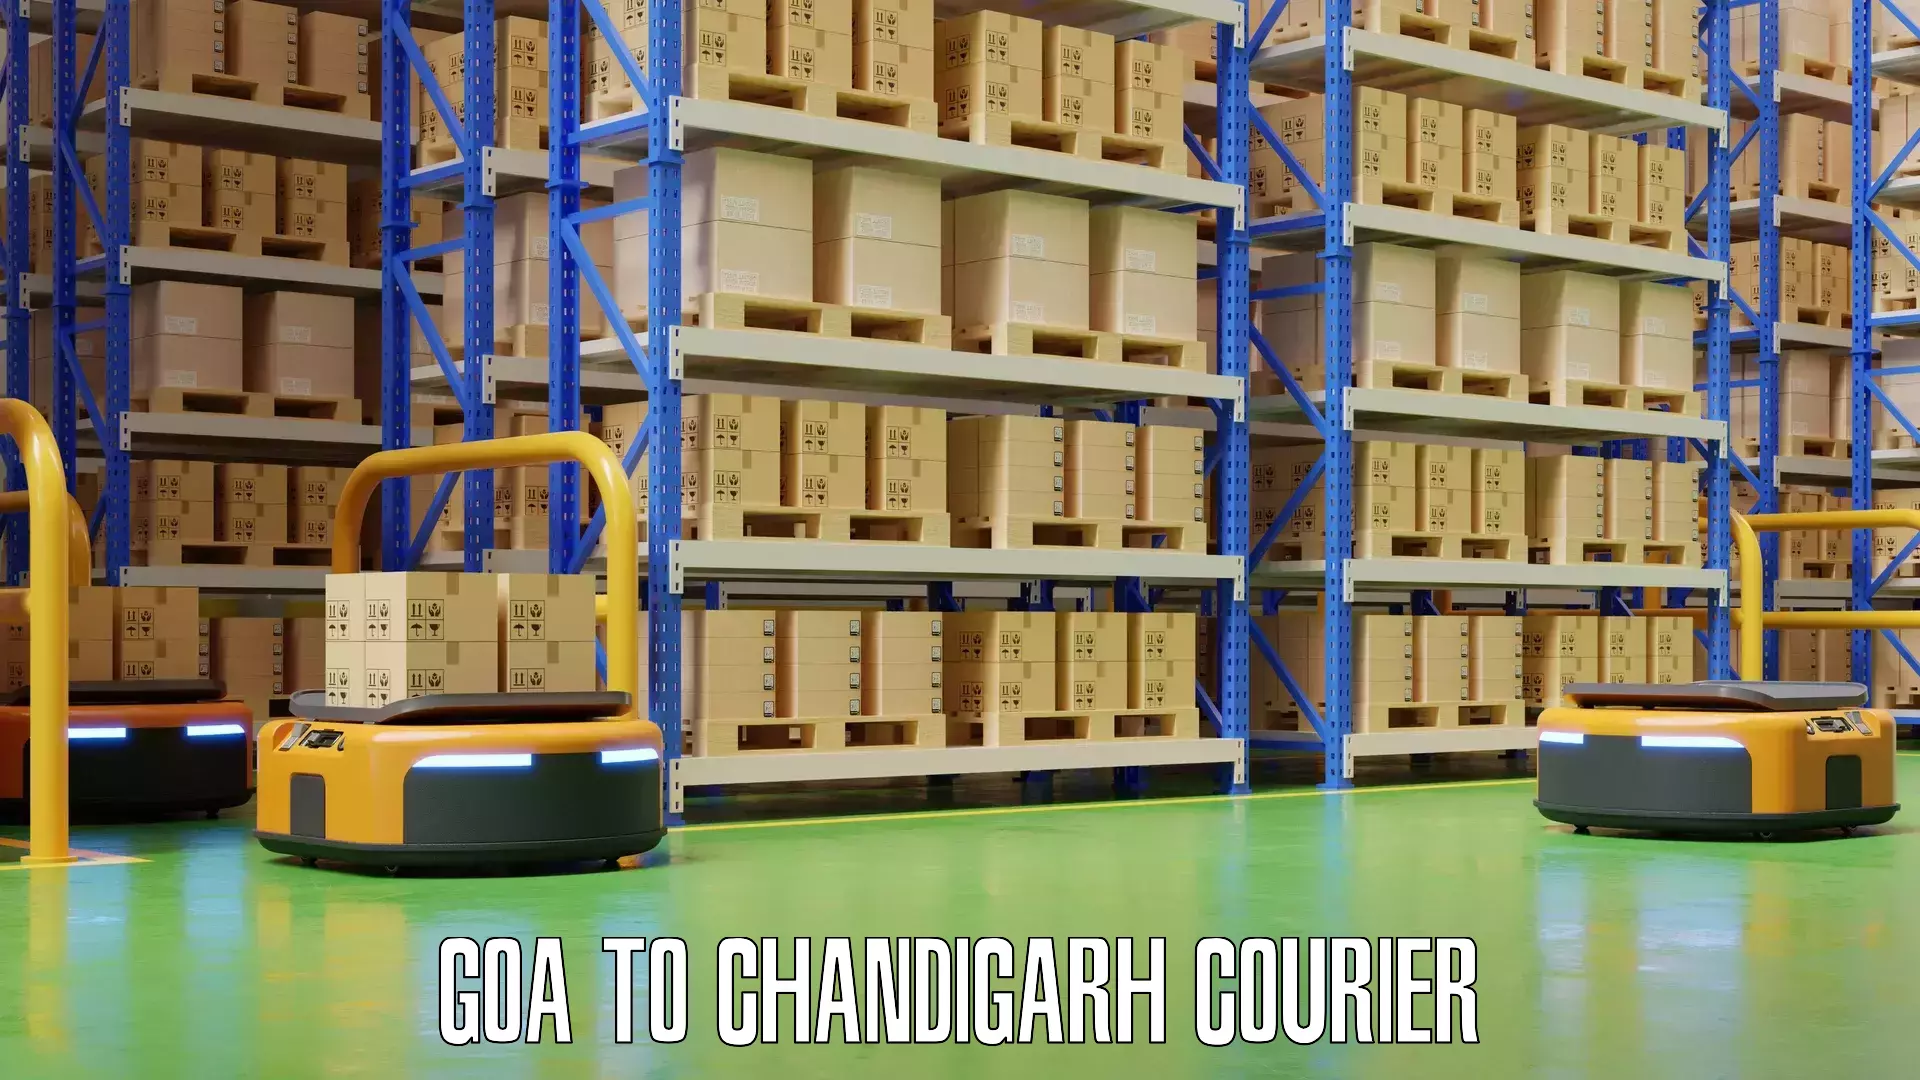 Luggage shipment specialists Goa to Chandigarh